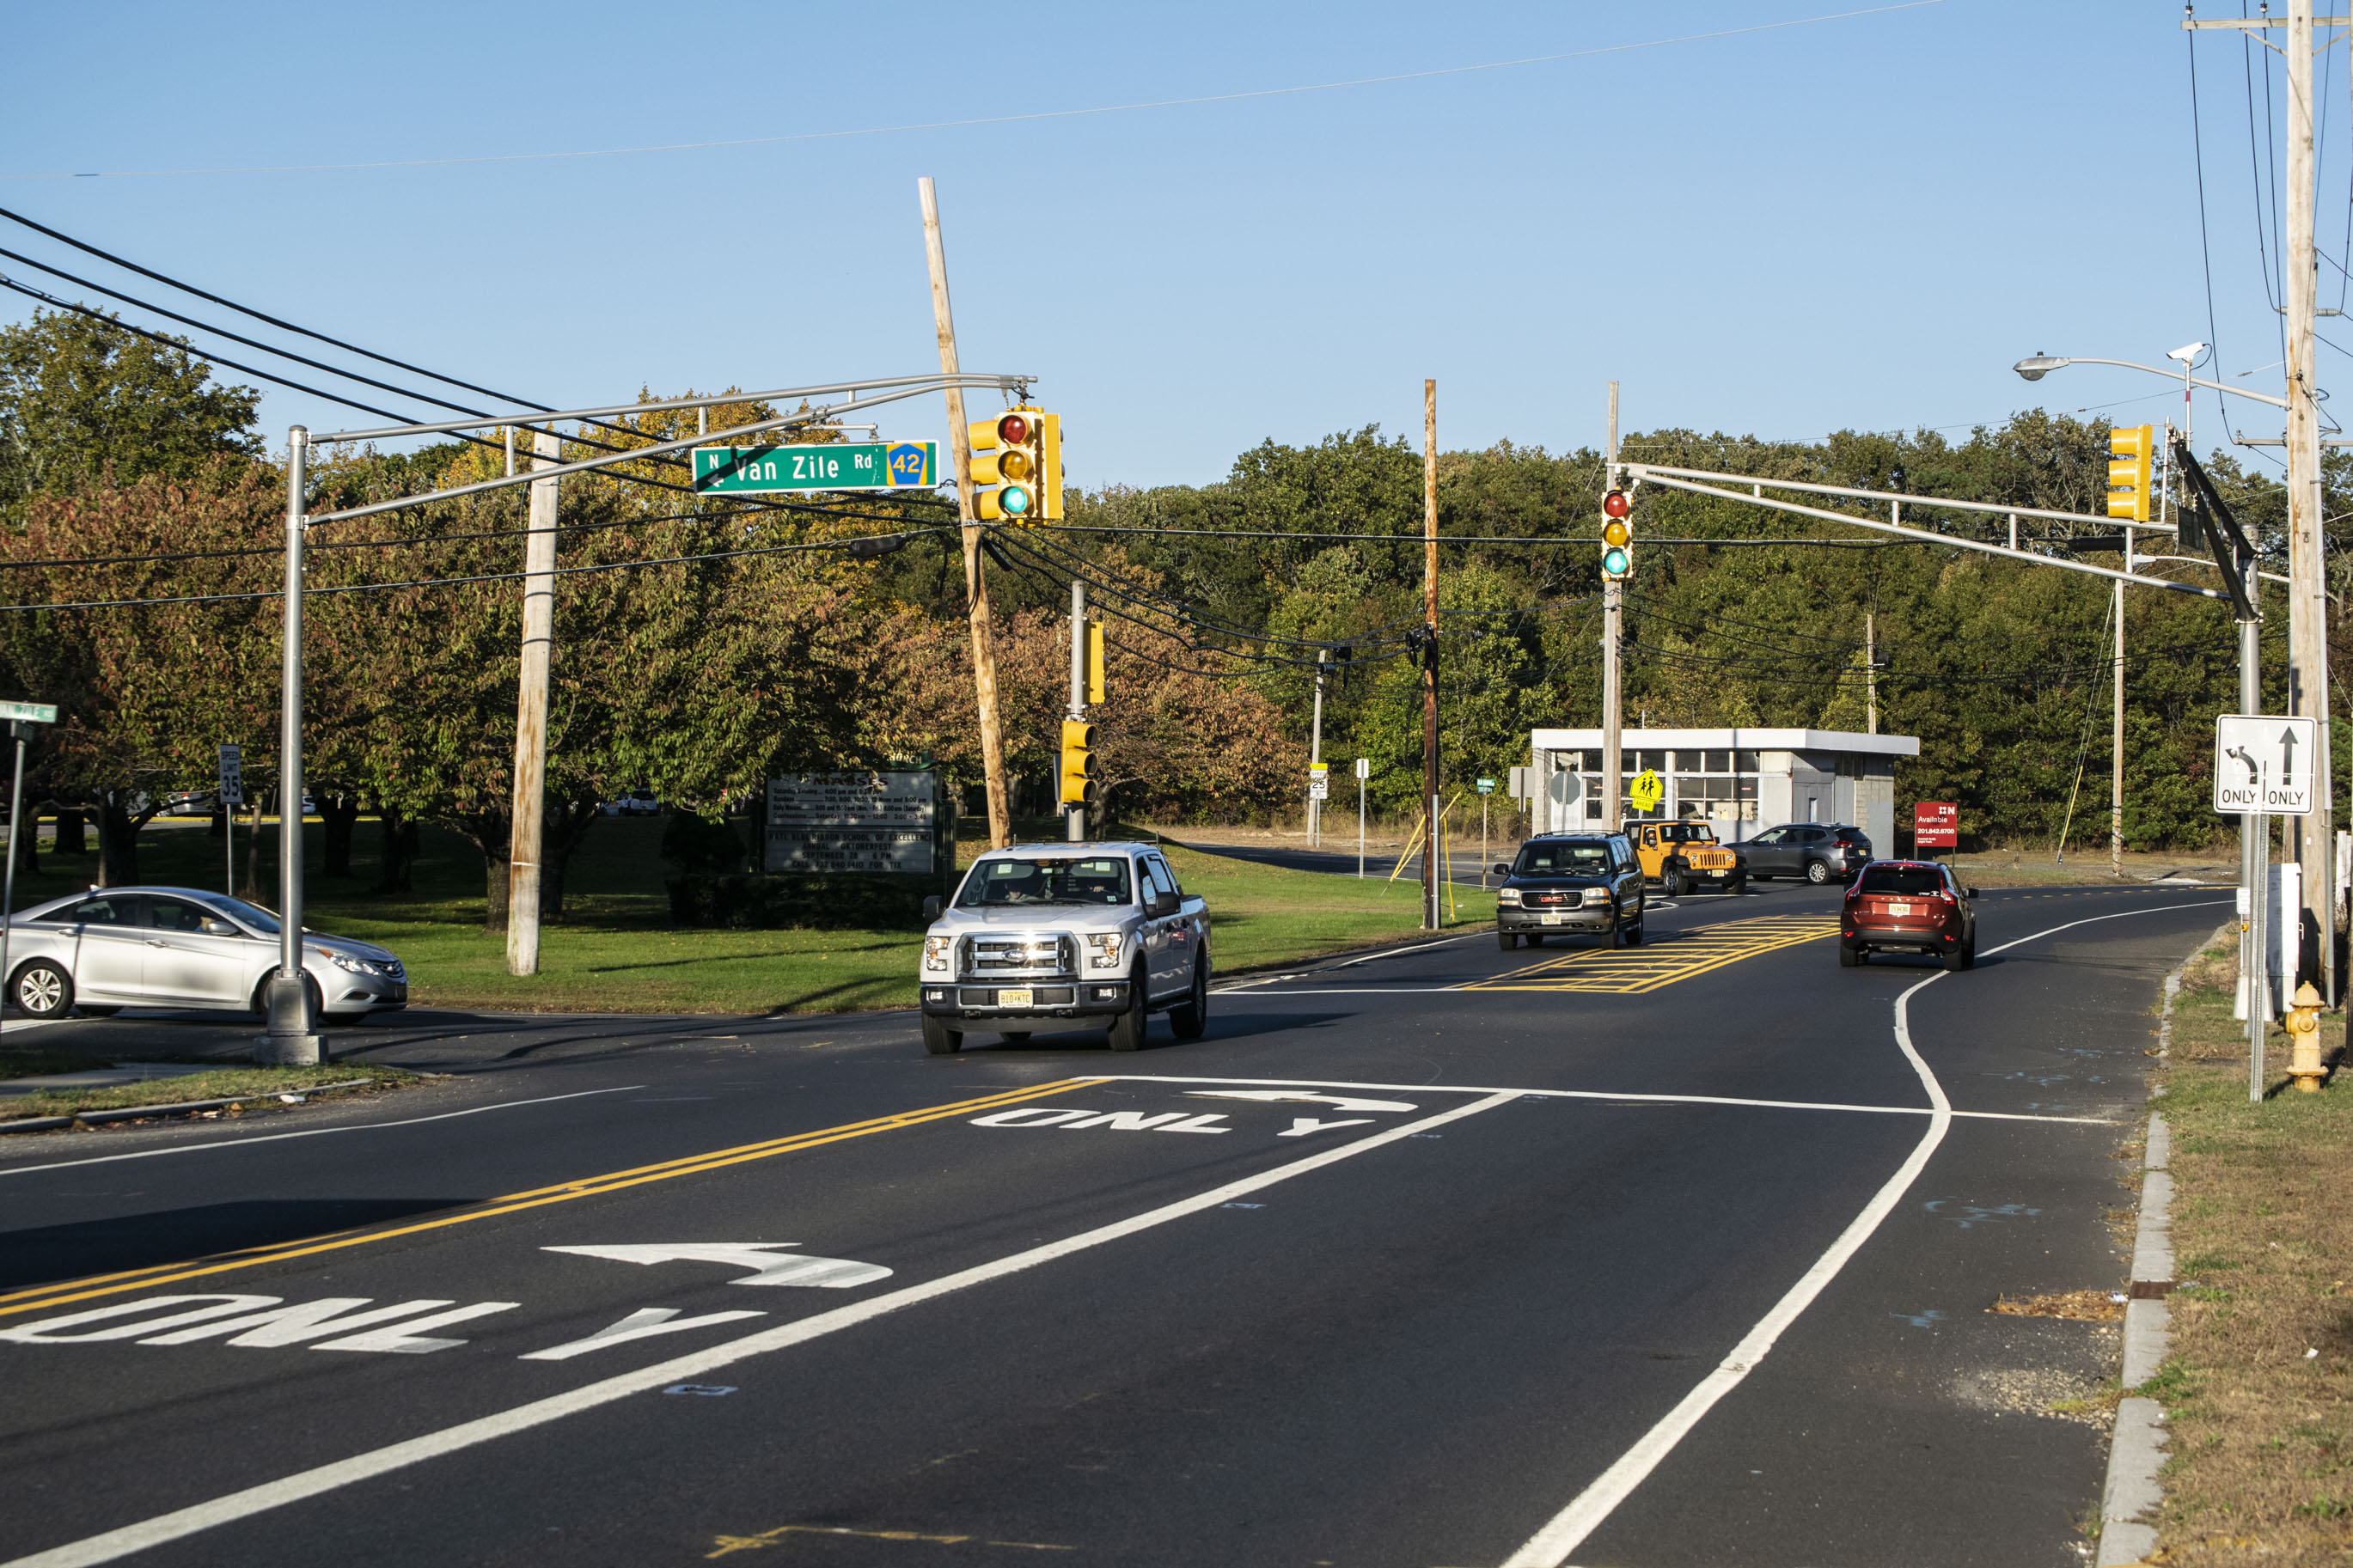 The intersection of Route 88 and Van Zile Road. (Photo: Daniel Nee)